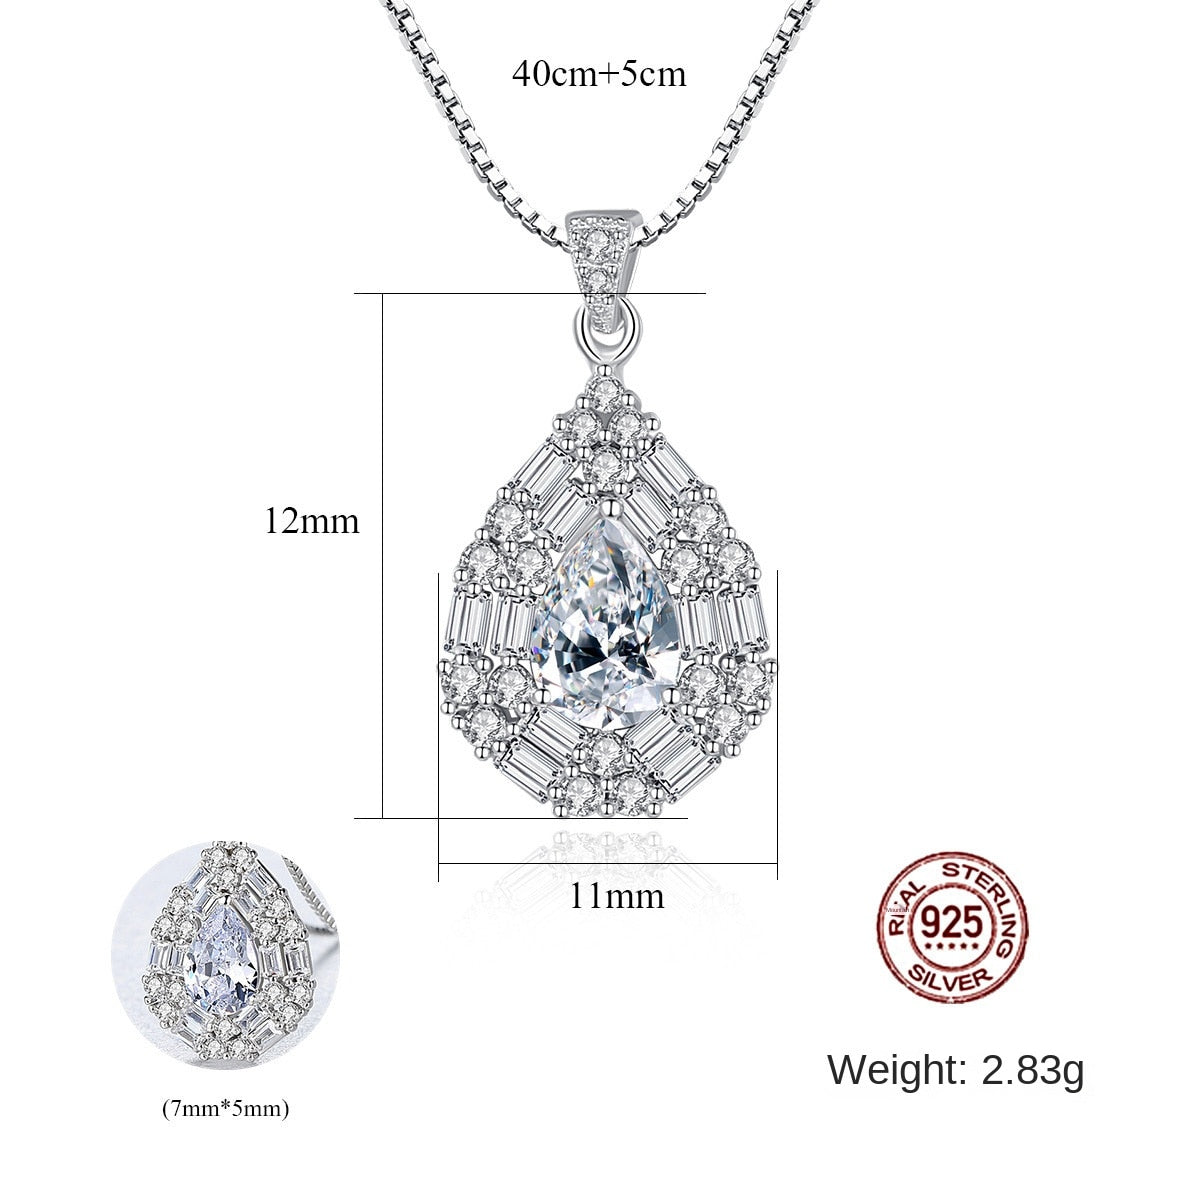 Gemstonely- S925 Silver Necklace with Micro-Inlaid Zircon Pendant for Women in a Fashionable and Versatile Design